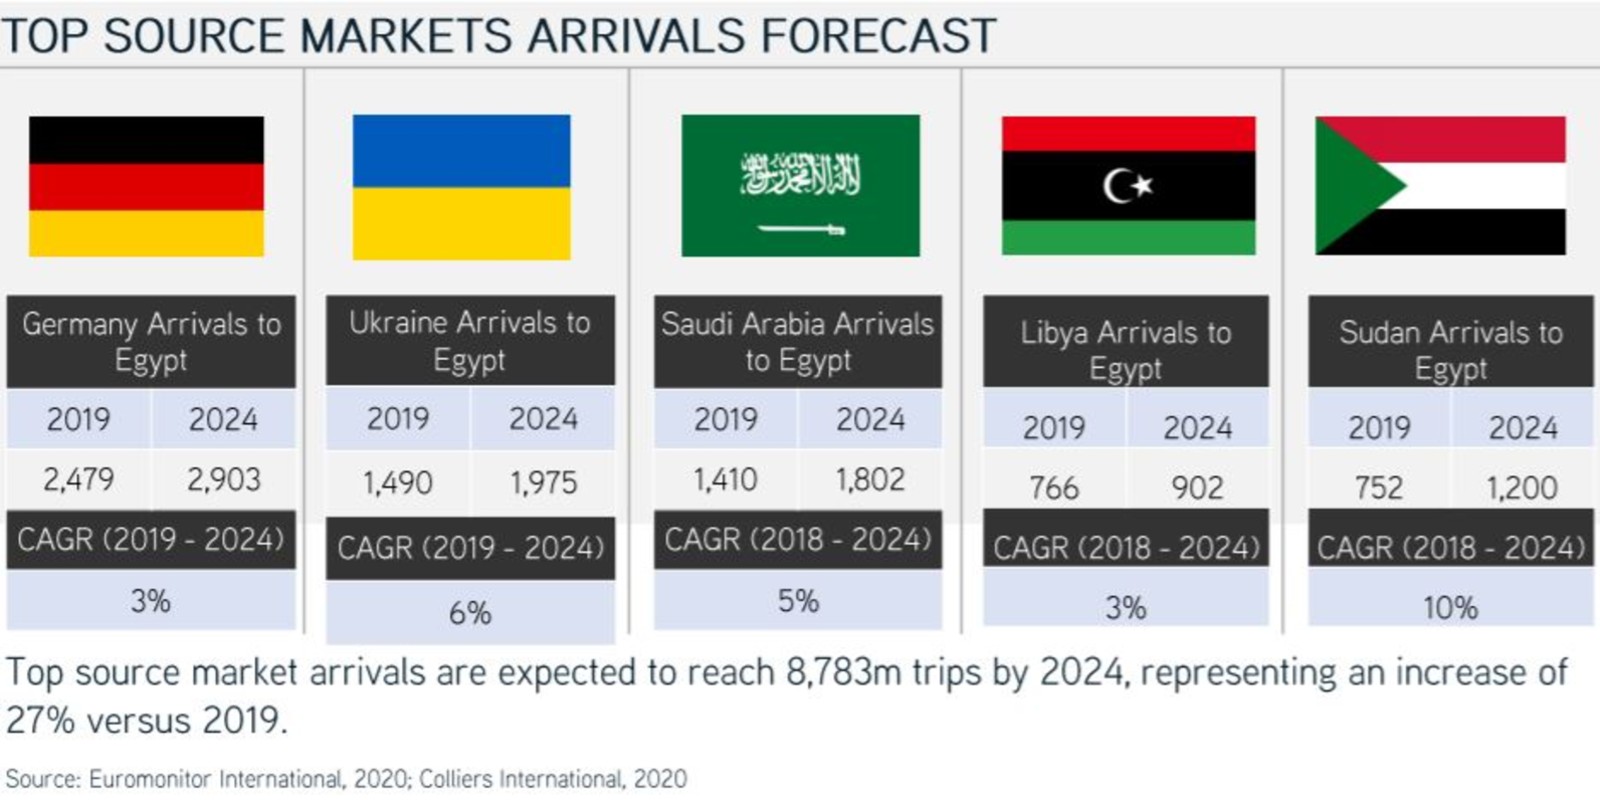 tourism numbers in egypt